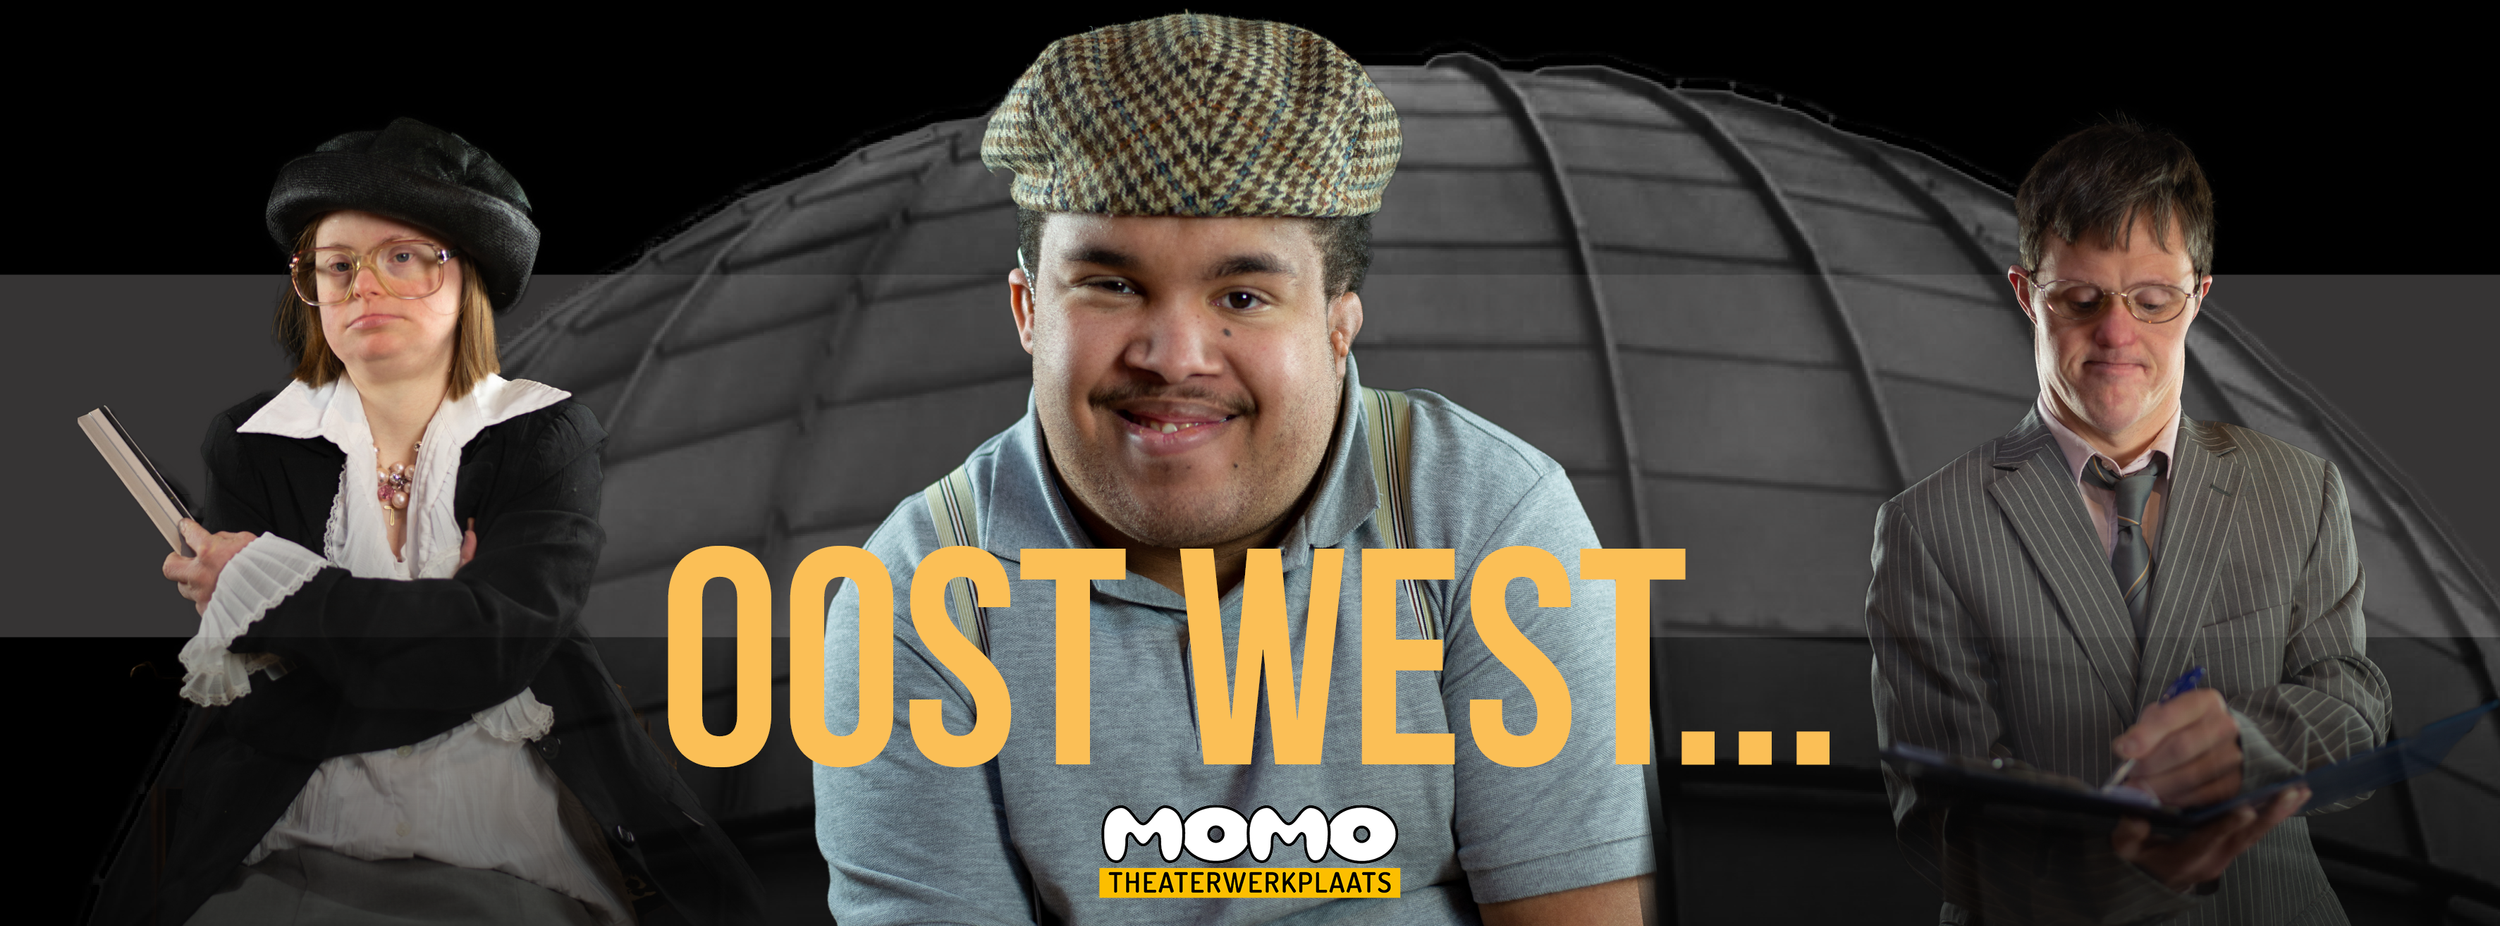 Oost west banner.png